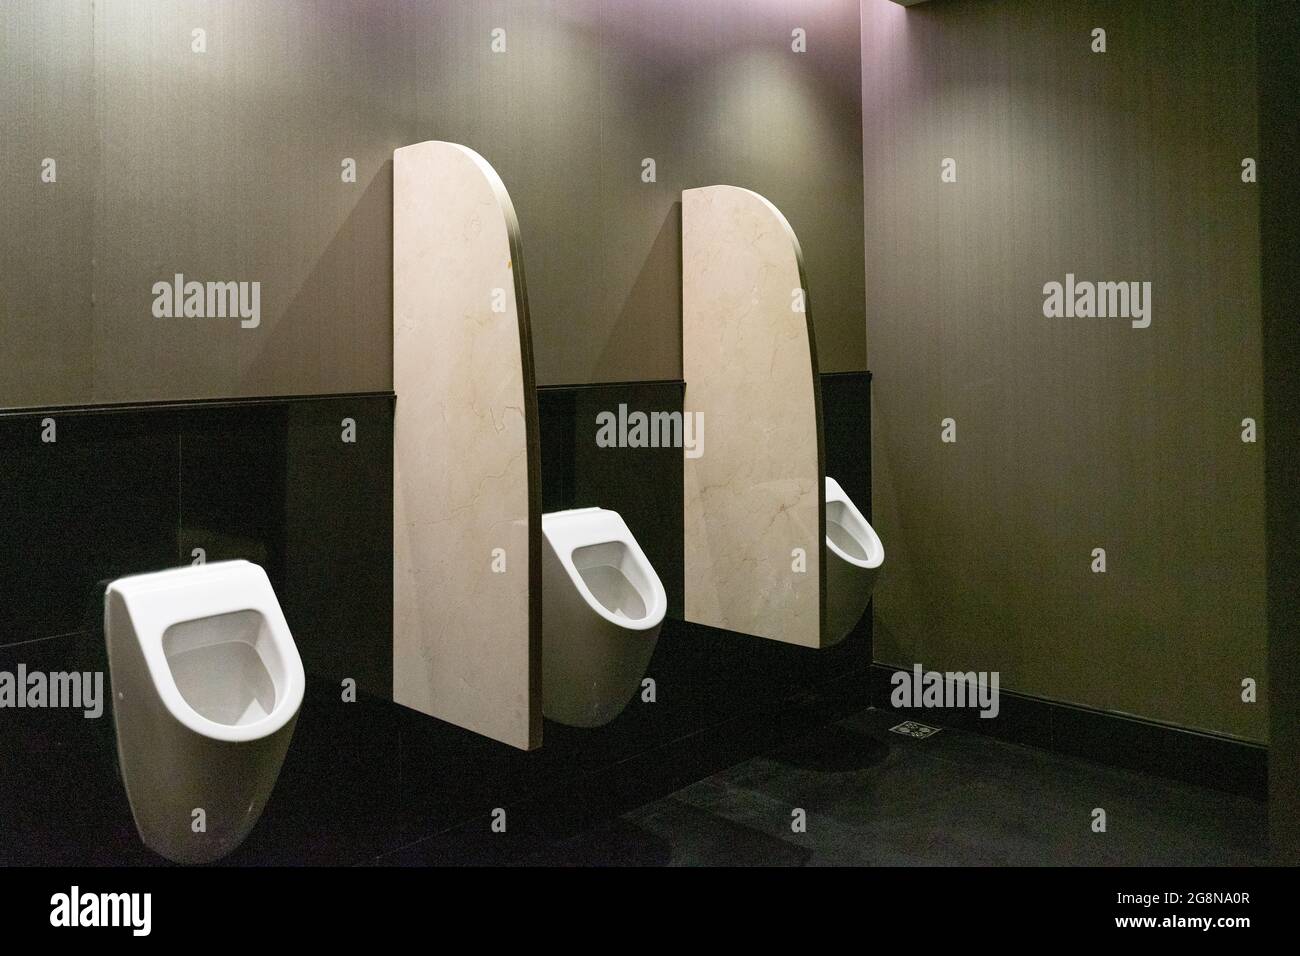 https://c8.alamy.com/comp/2G8NA0R/three-white-mens-urinals-in-a-bathroom-in-lobby-of-luxurious-hotel-2G8NA0R.jpg